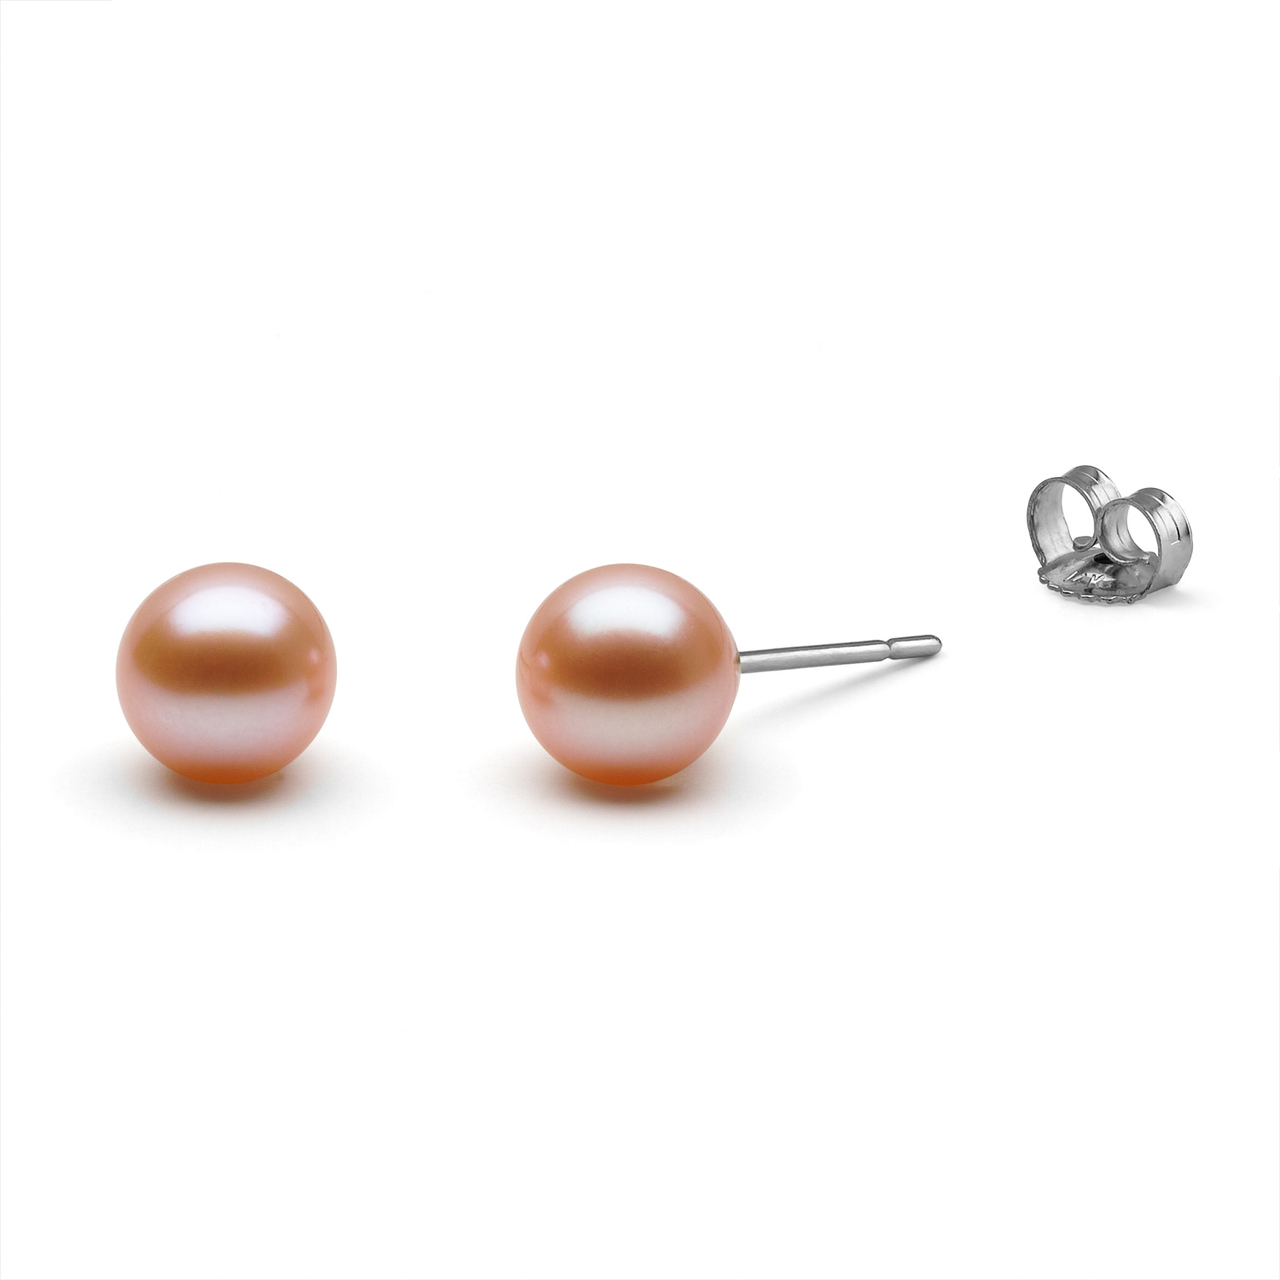 Pink Round Freshwater Cultured AAA Pearl Stud Earrings 14K Gold